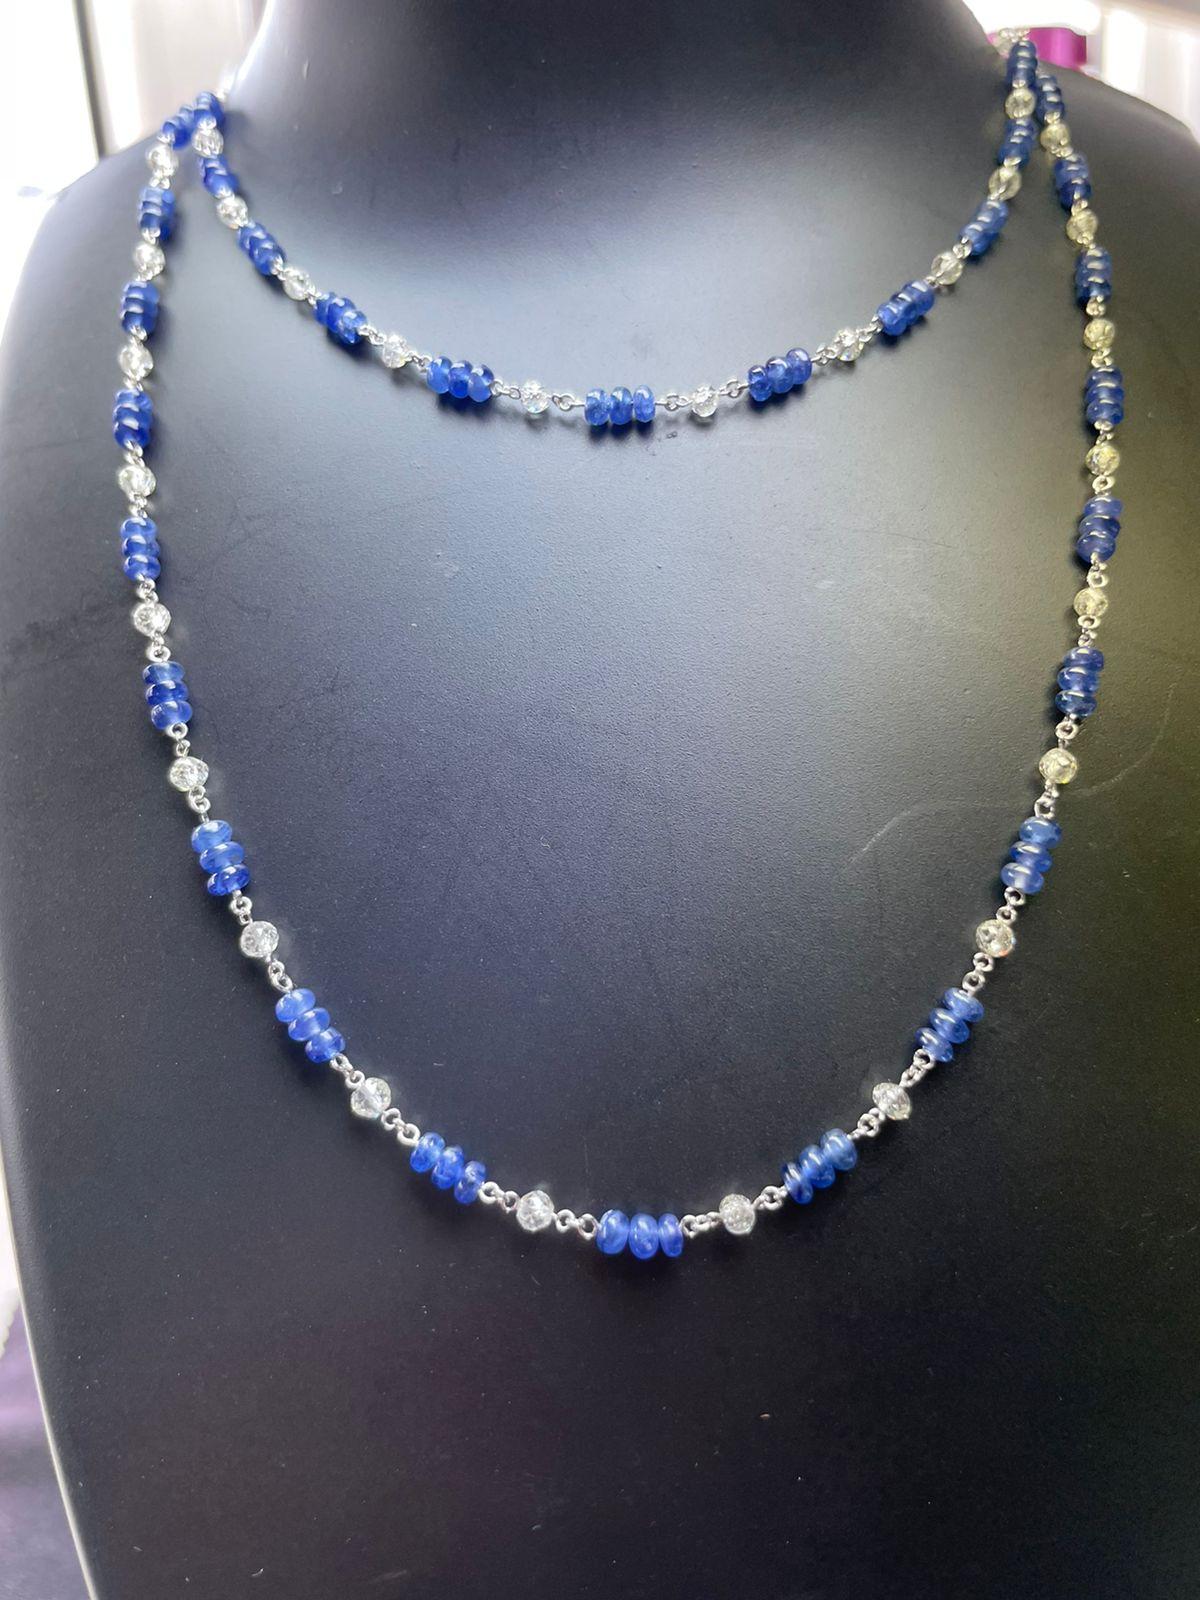 PANIM 18k White Gold Diamond Beads & Sapphire Necklace

Diamond Beads & Natural Blue Sapphires are used to embellish a delicate necklace ,everything fluidly flowing among one another, their hues enhancing one another's. Perfect as a gift for loved